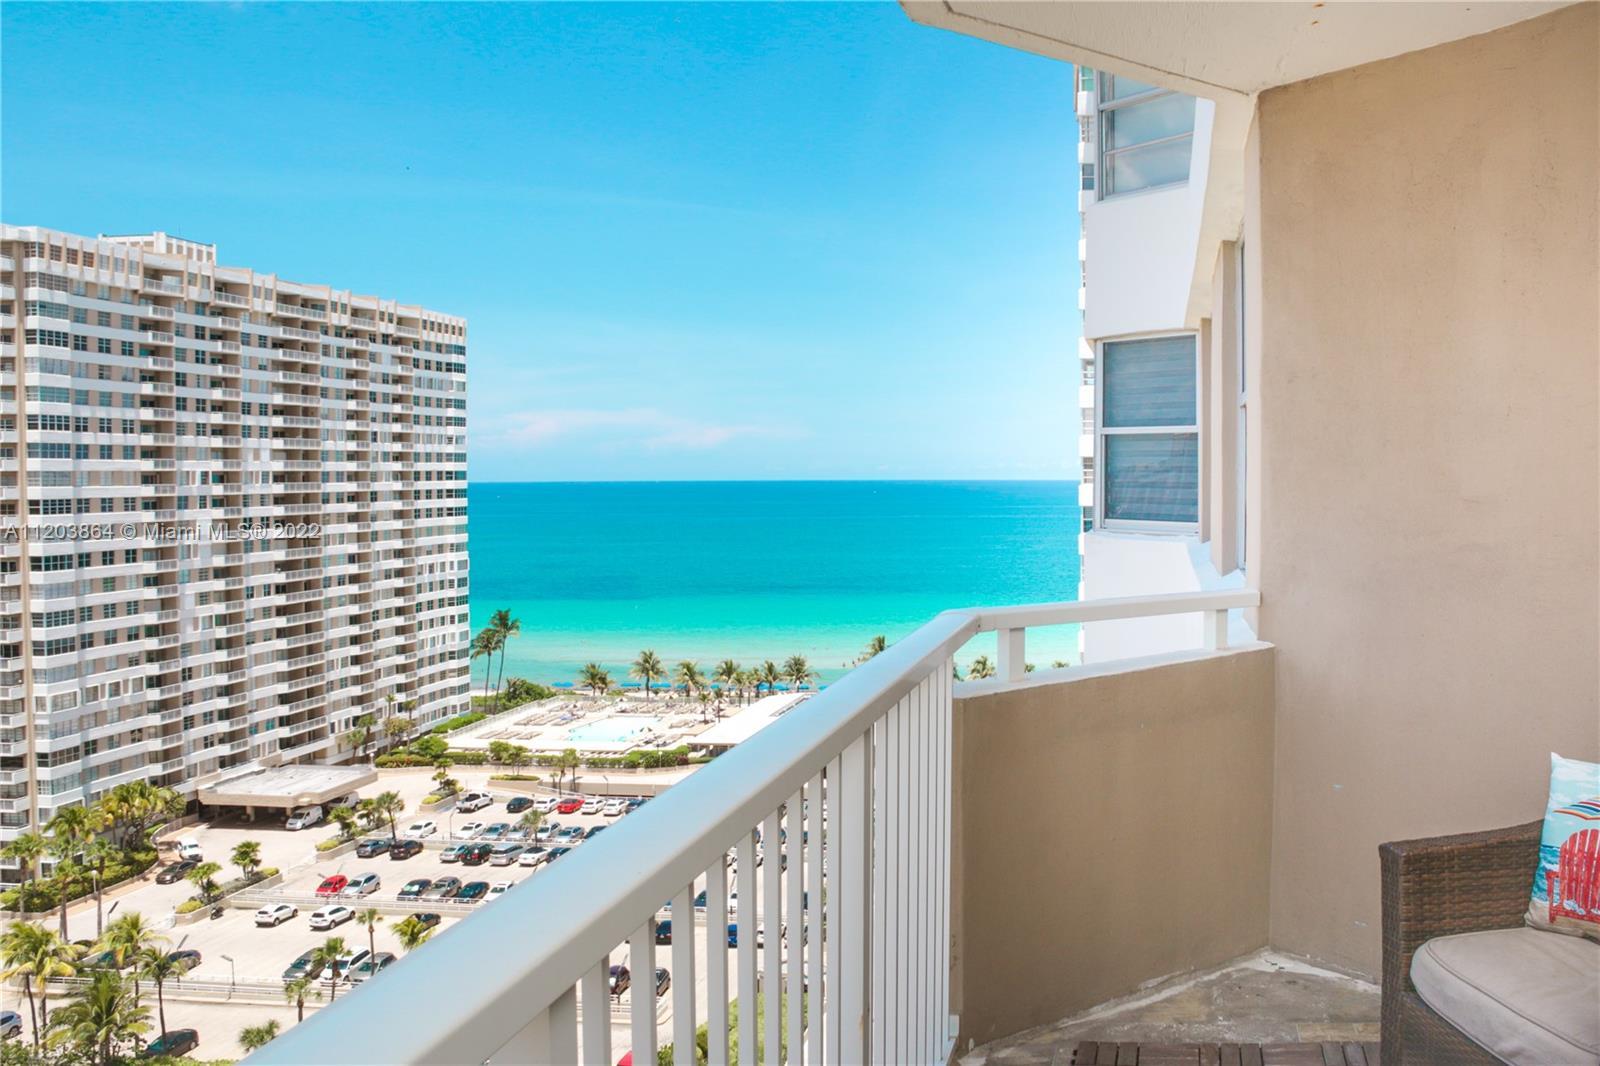 Spend your days relaxing on the beach. With spectacular views of the intracoastal and ocean this bea